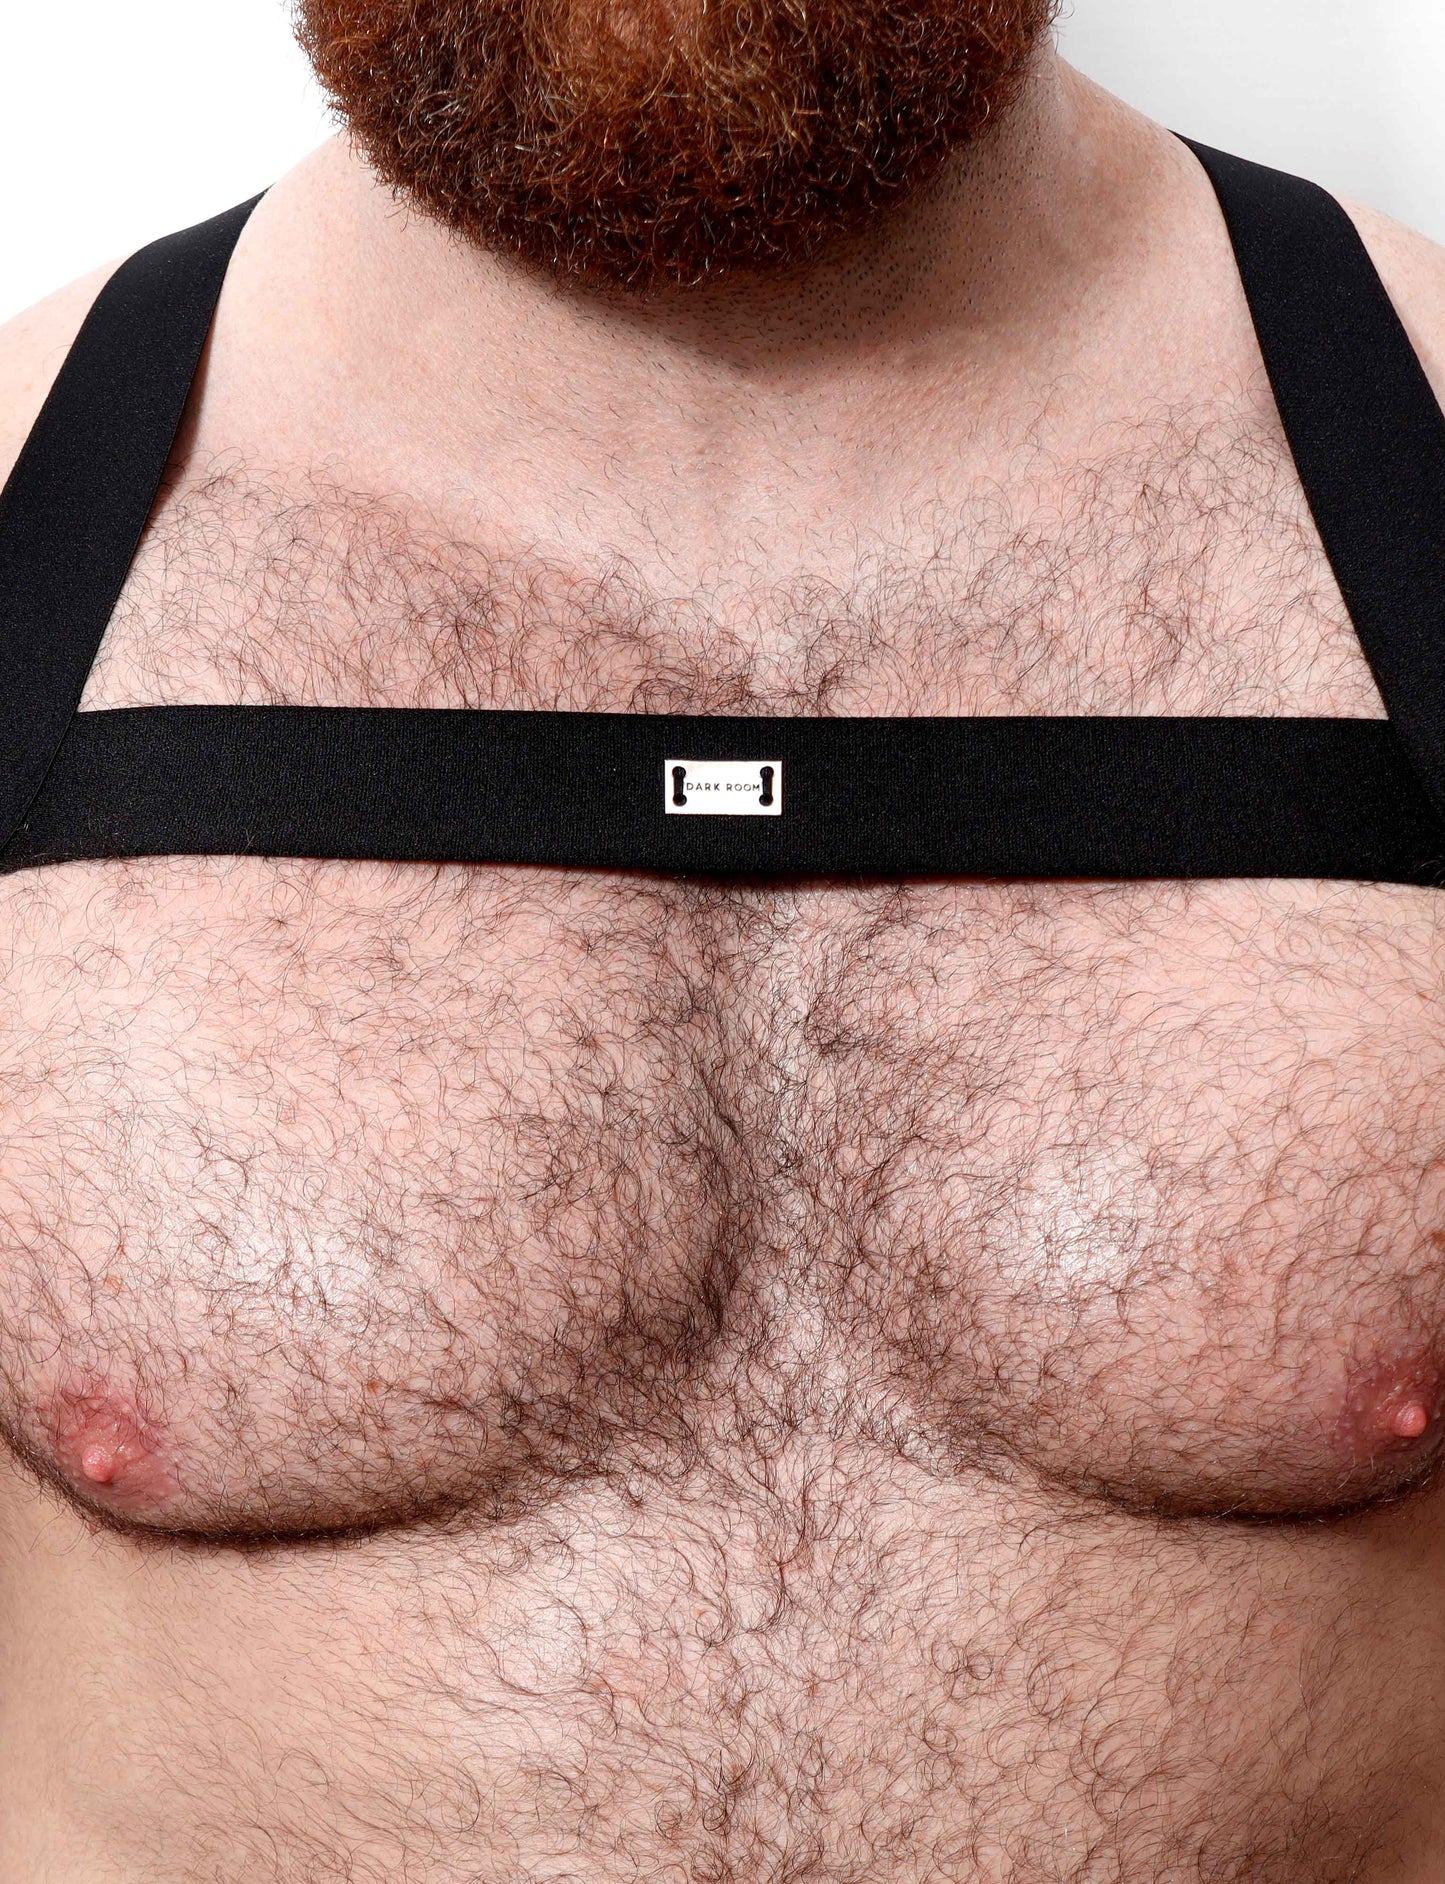 Chrome Chest Harness - Silver Hardware